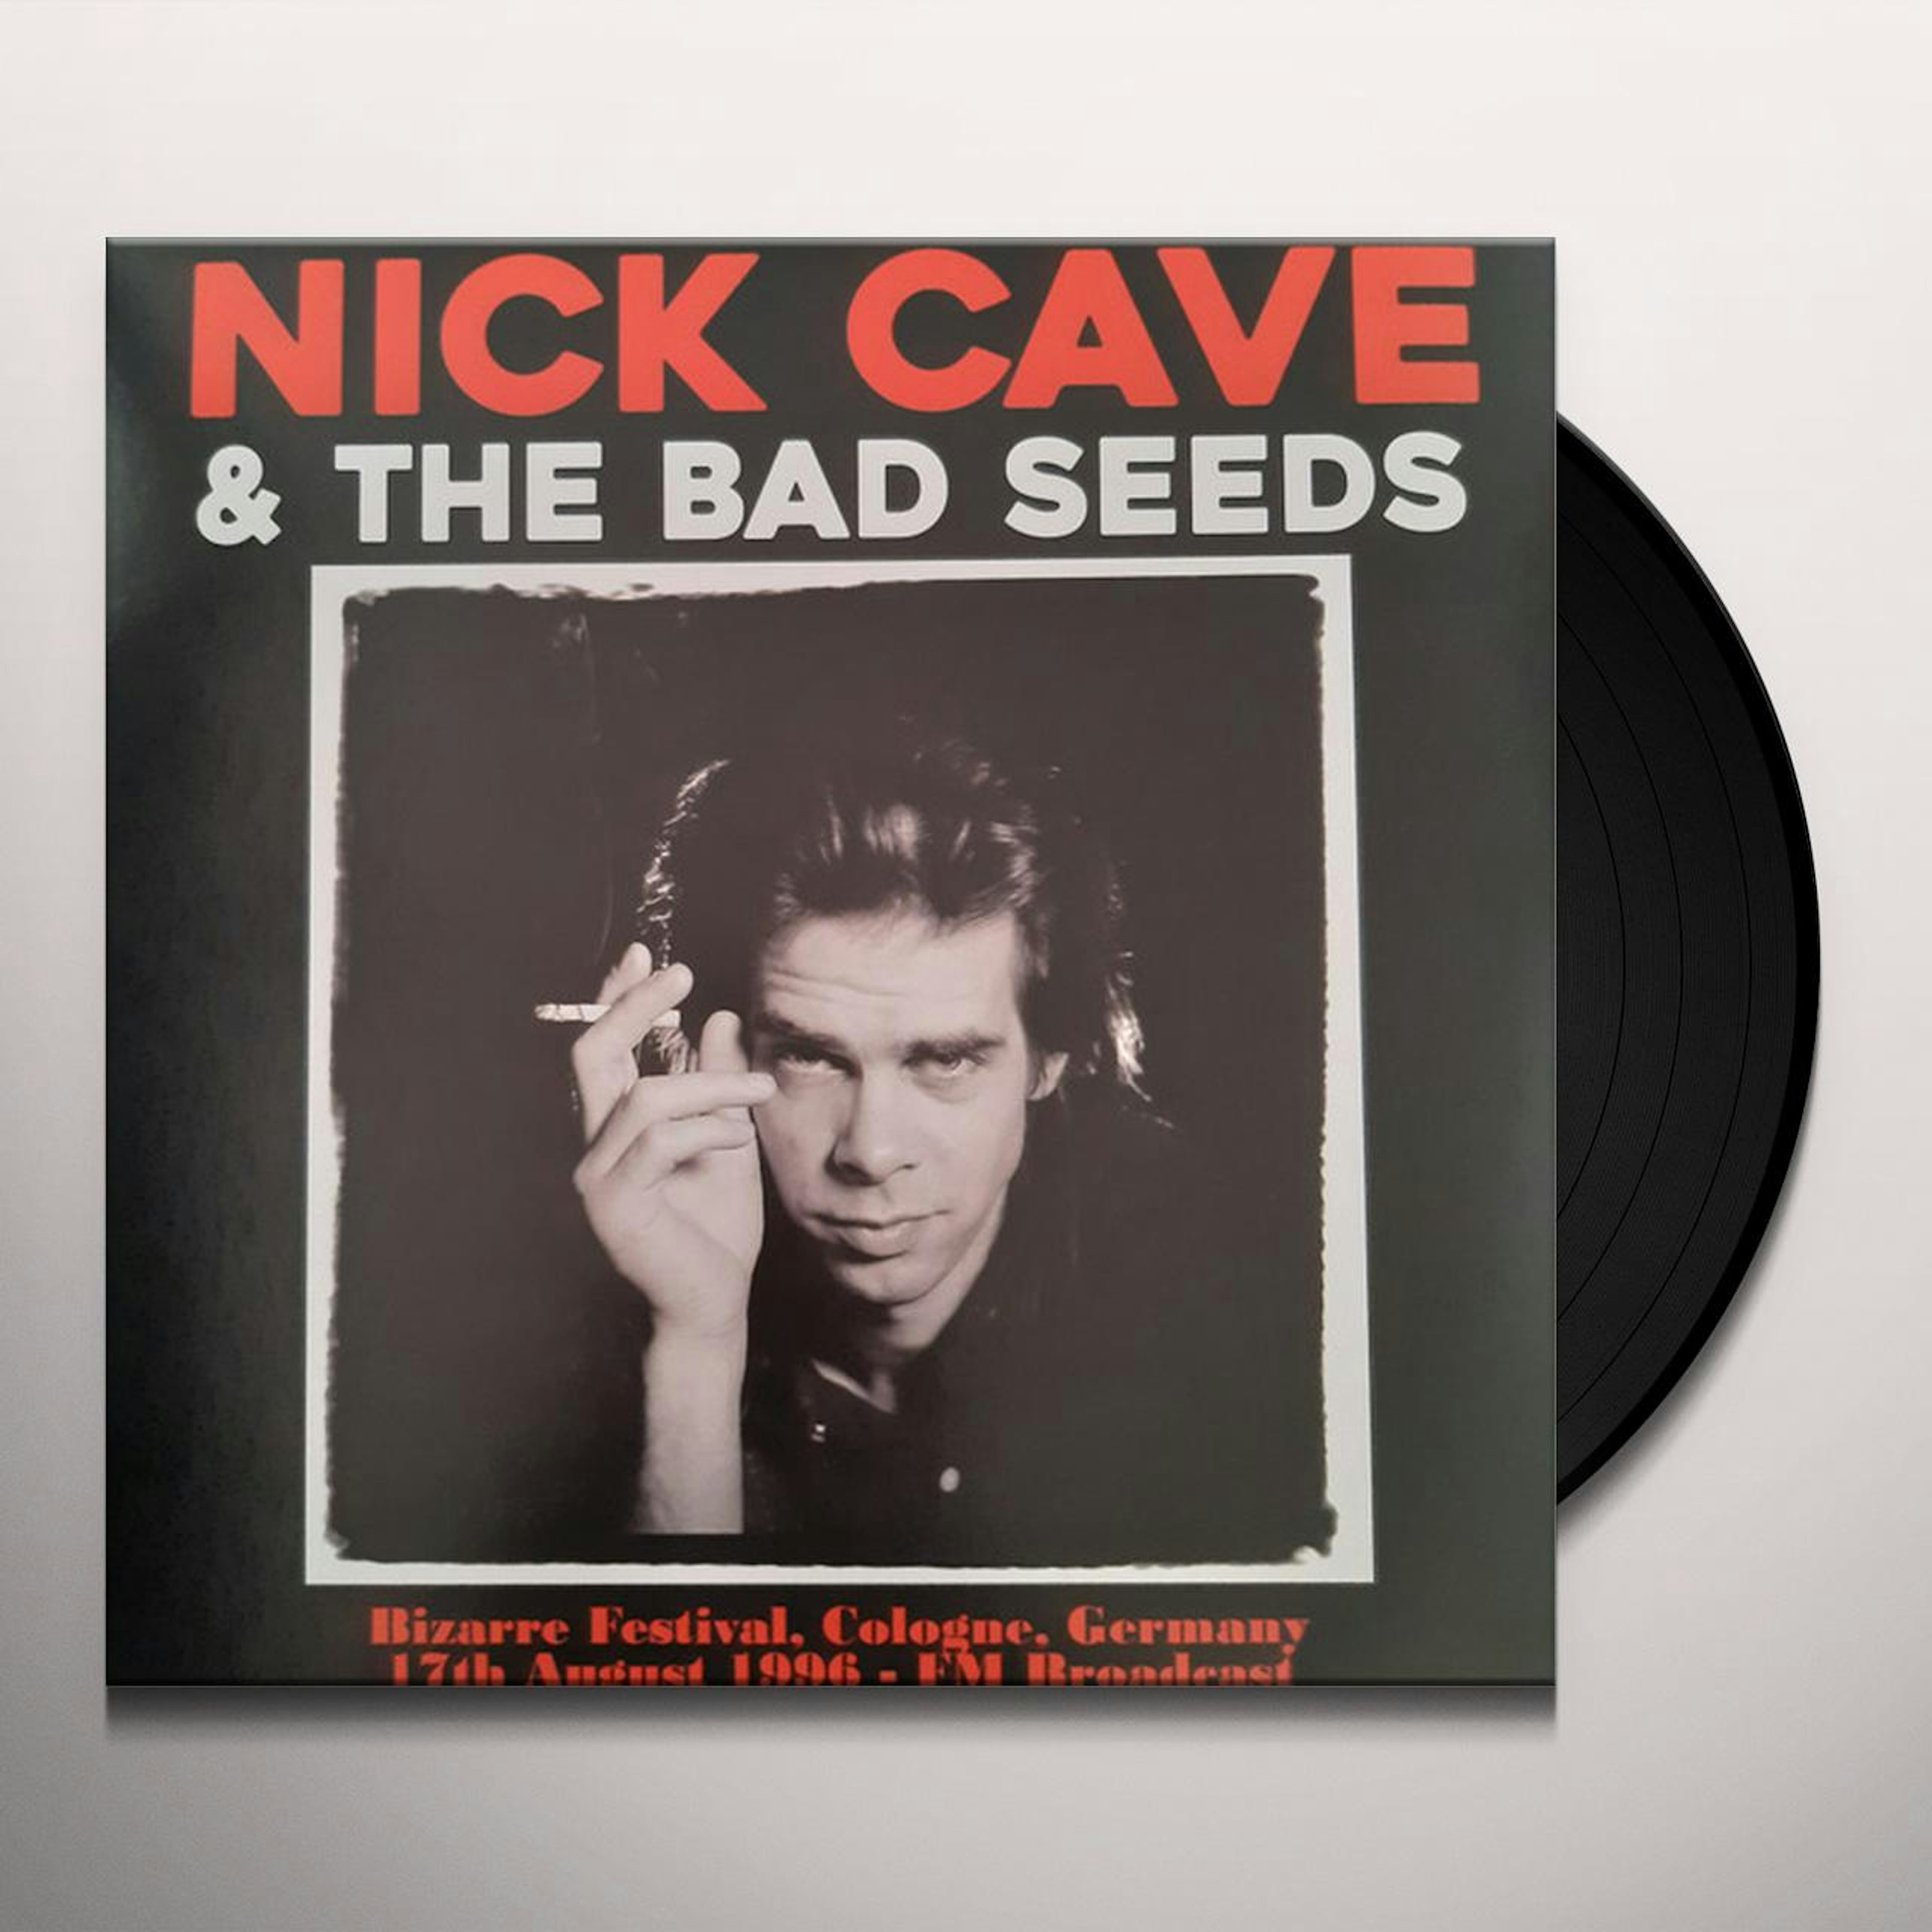 Nick Cave & The Bad Seeds BIZARRE FESTIVAL, COLOGNE, GERMANY, 18/17/96 - FM  BROADCAST Vinyl Record